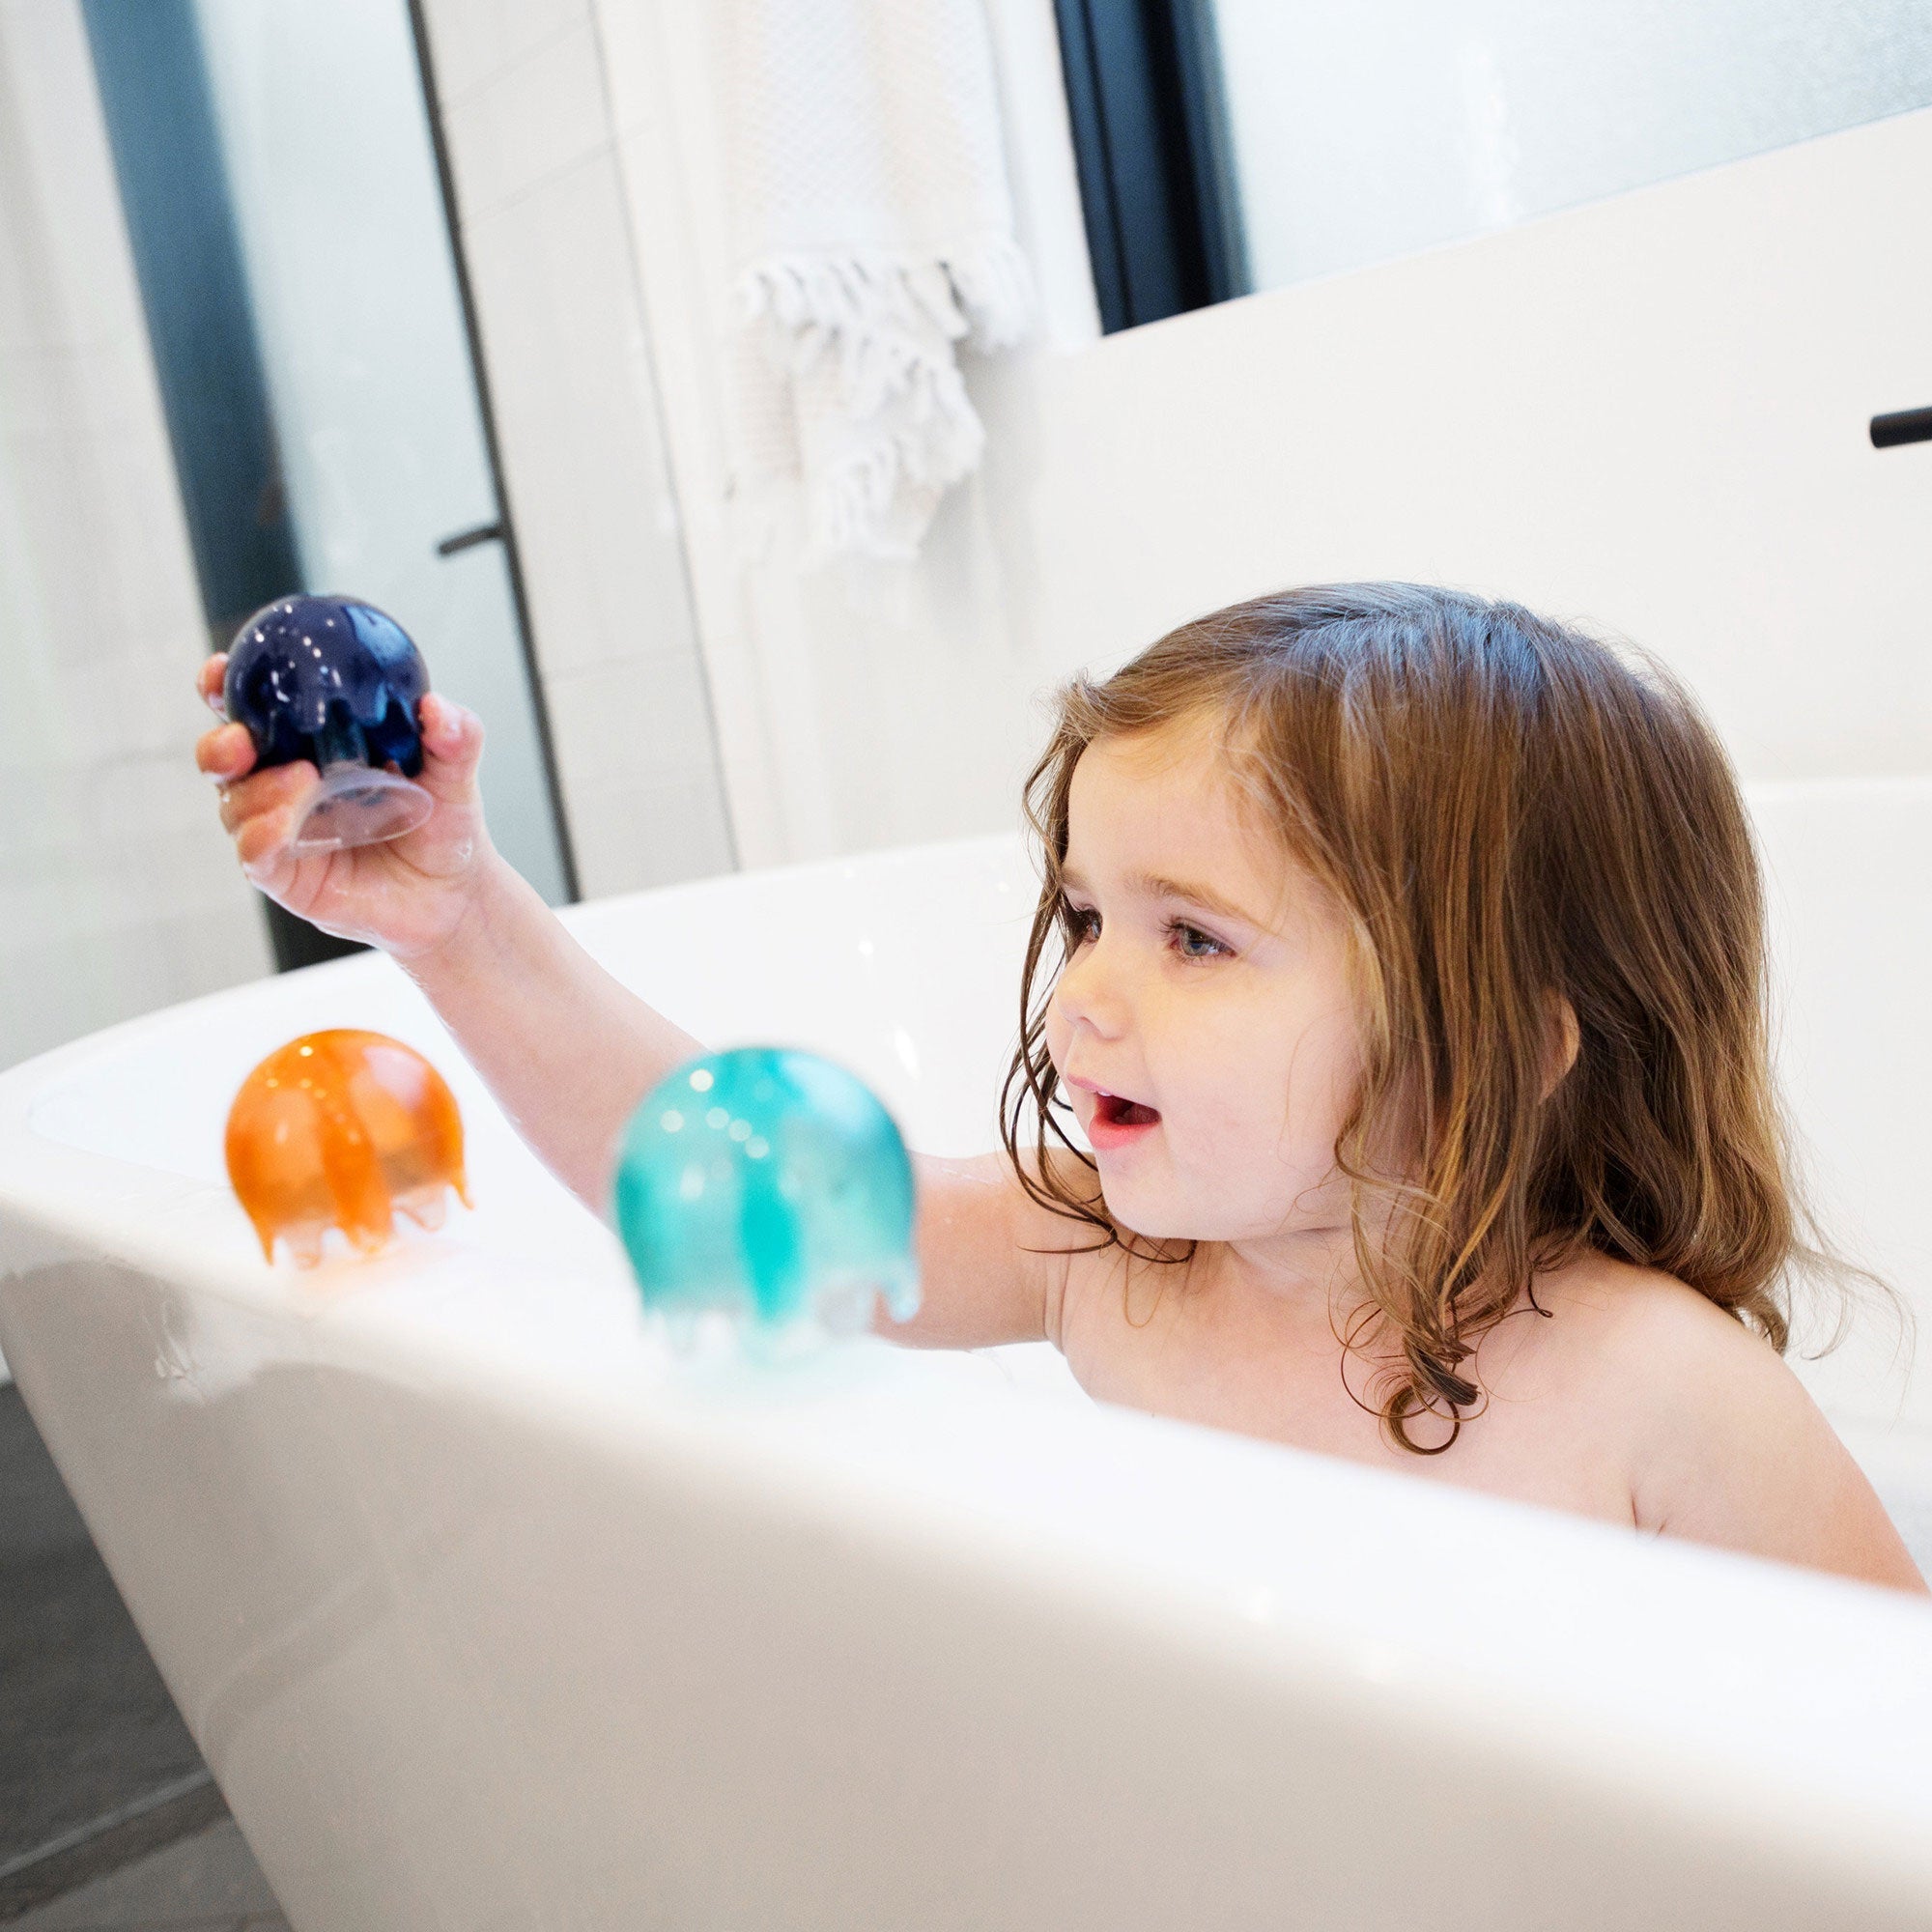 Jellies Suction Cup Bath Toy - Boon